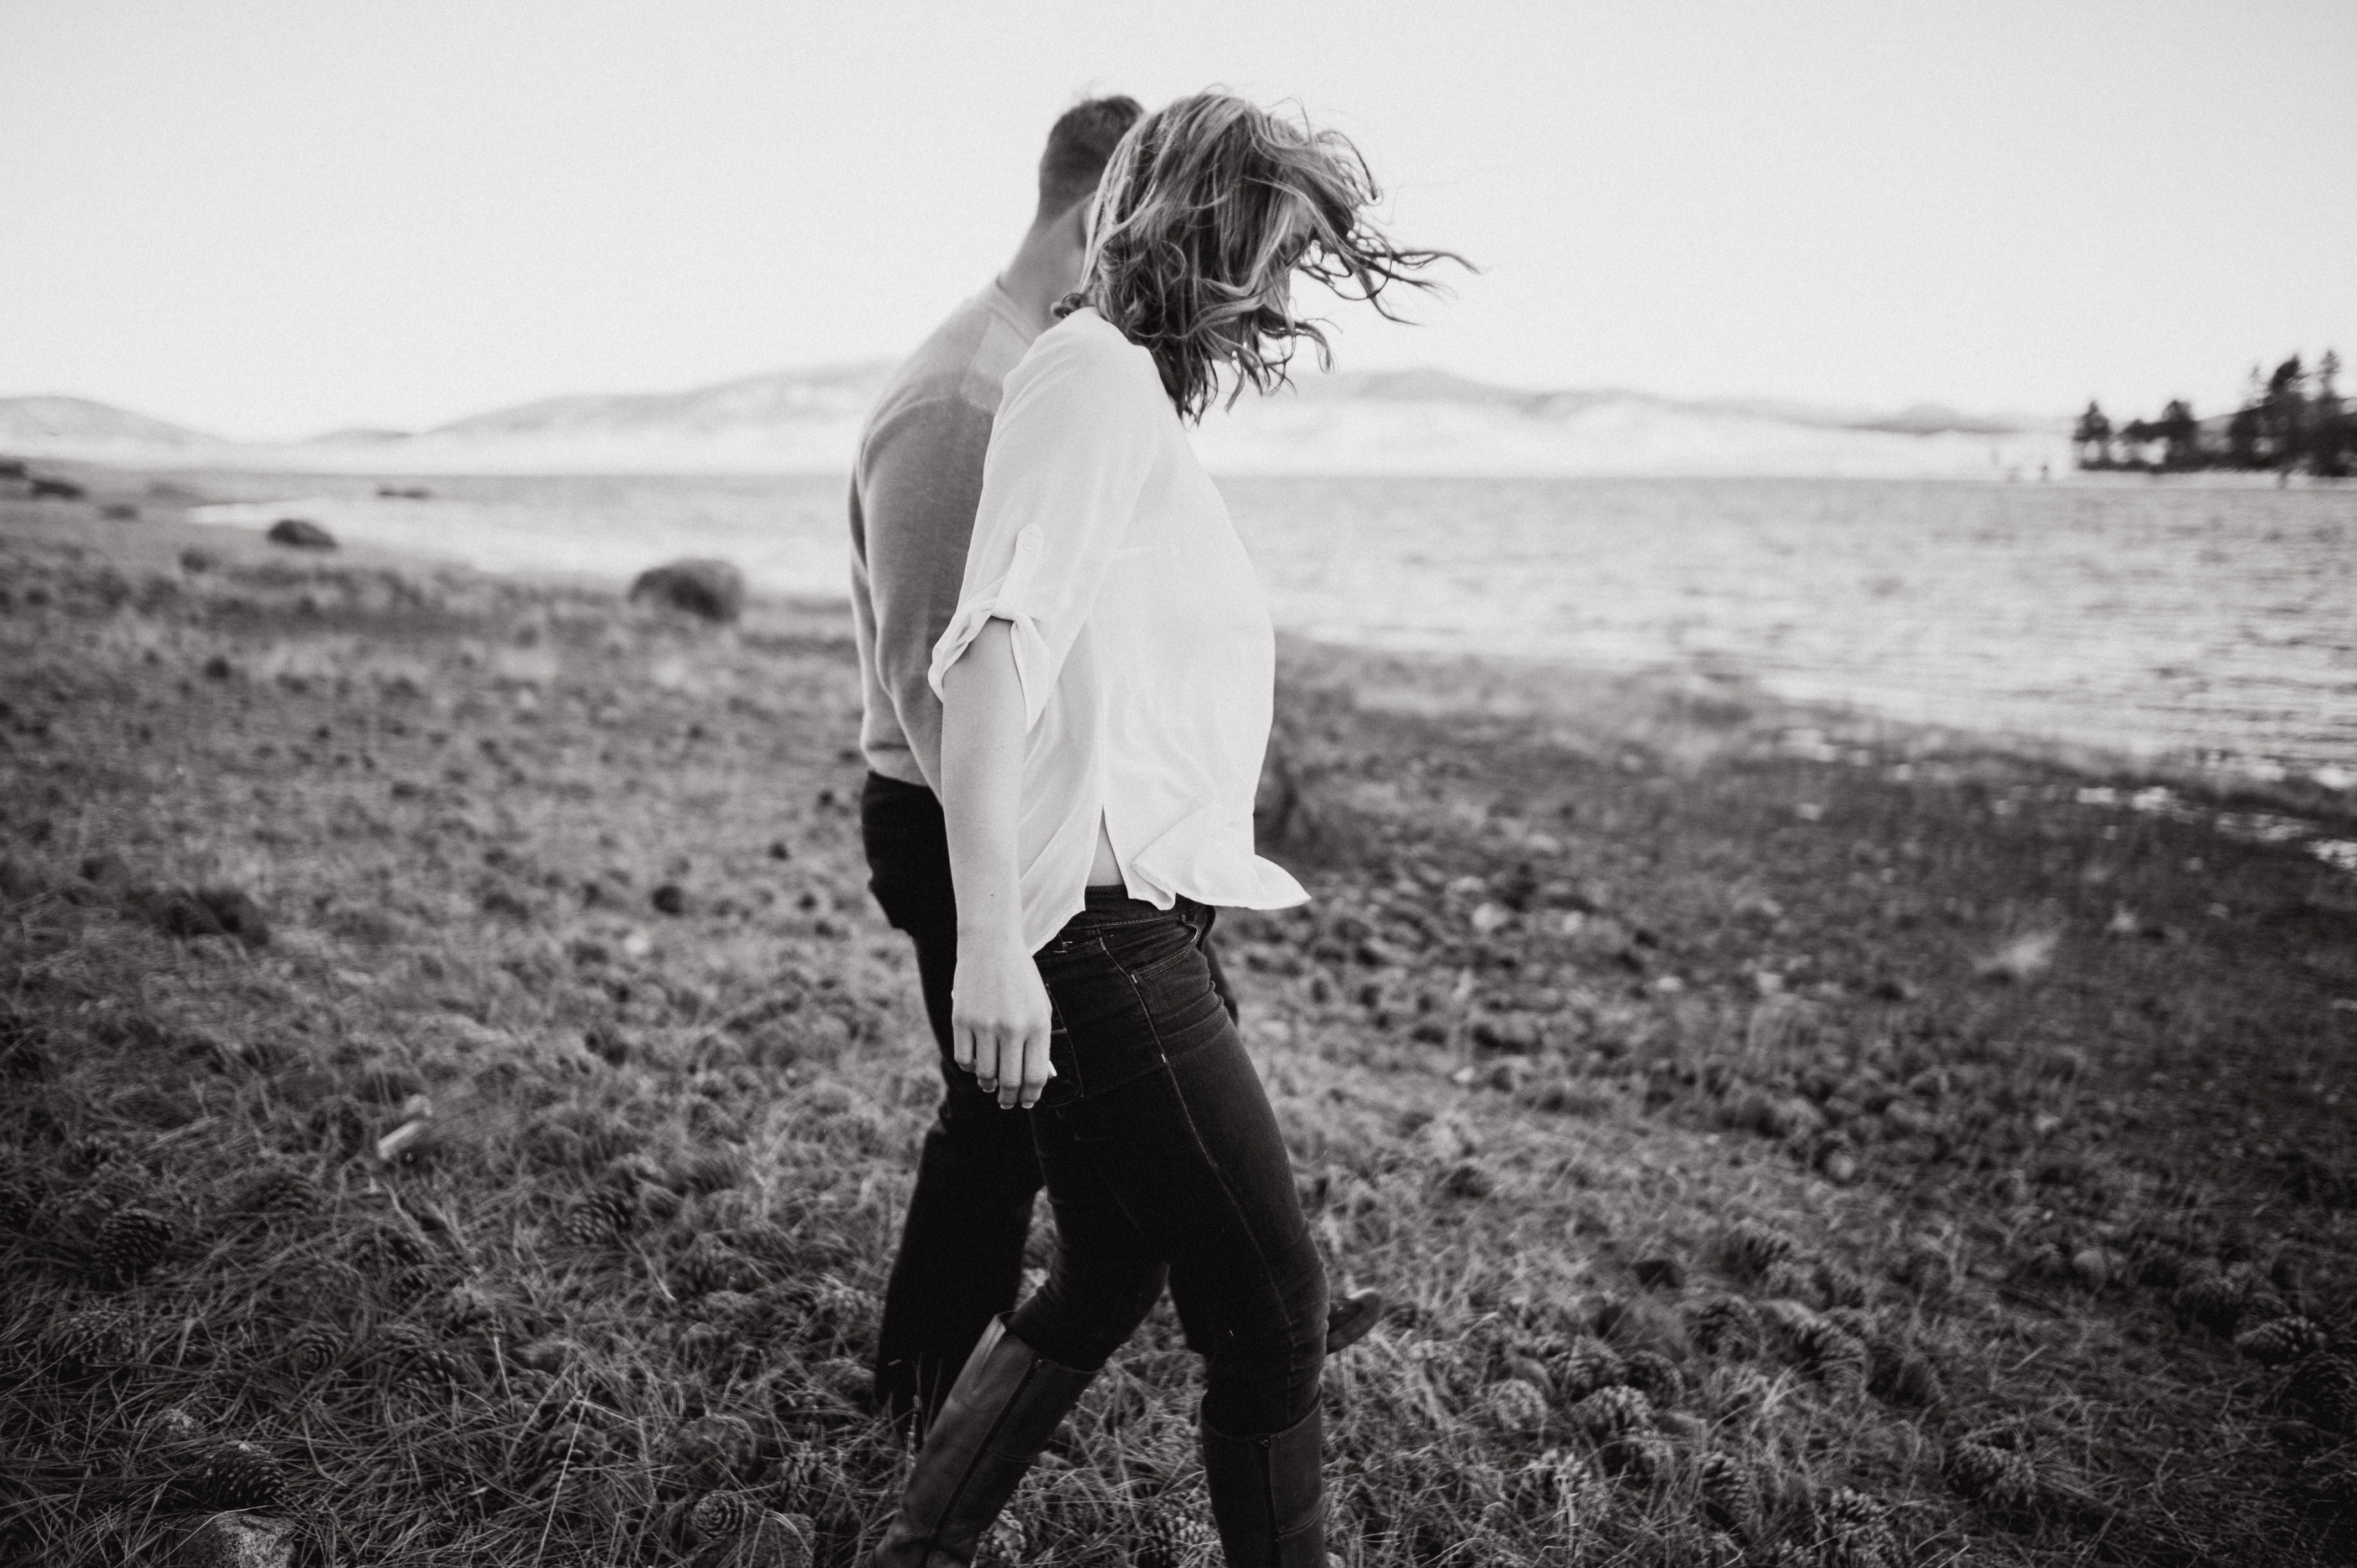 A Winter and Plaid Inspired Engagement Session at Lake Cuyamaca in Julian California photos